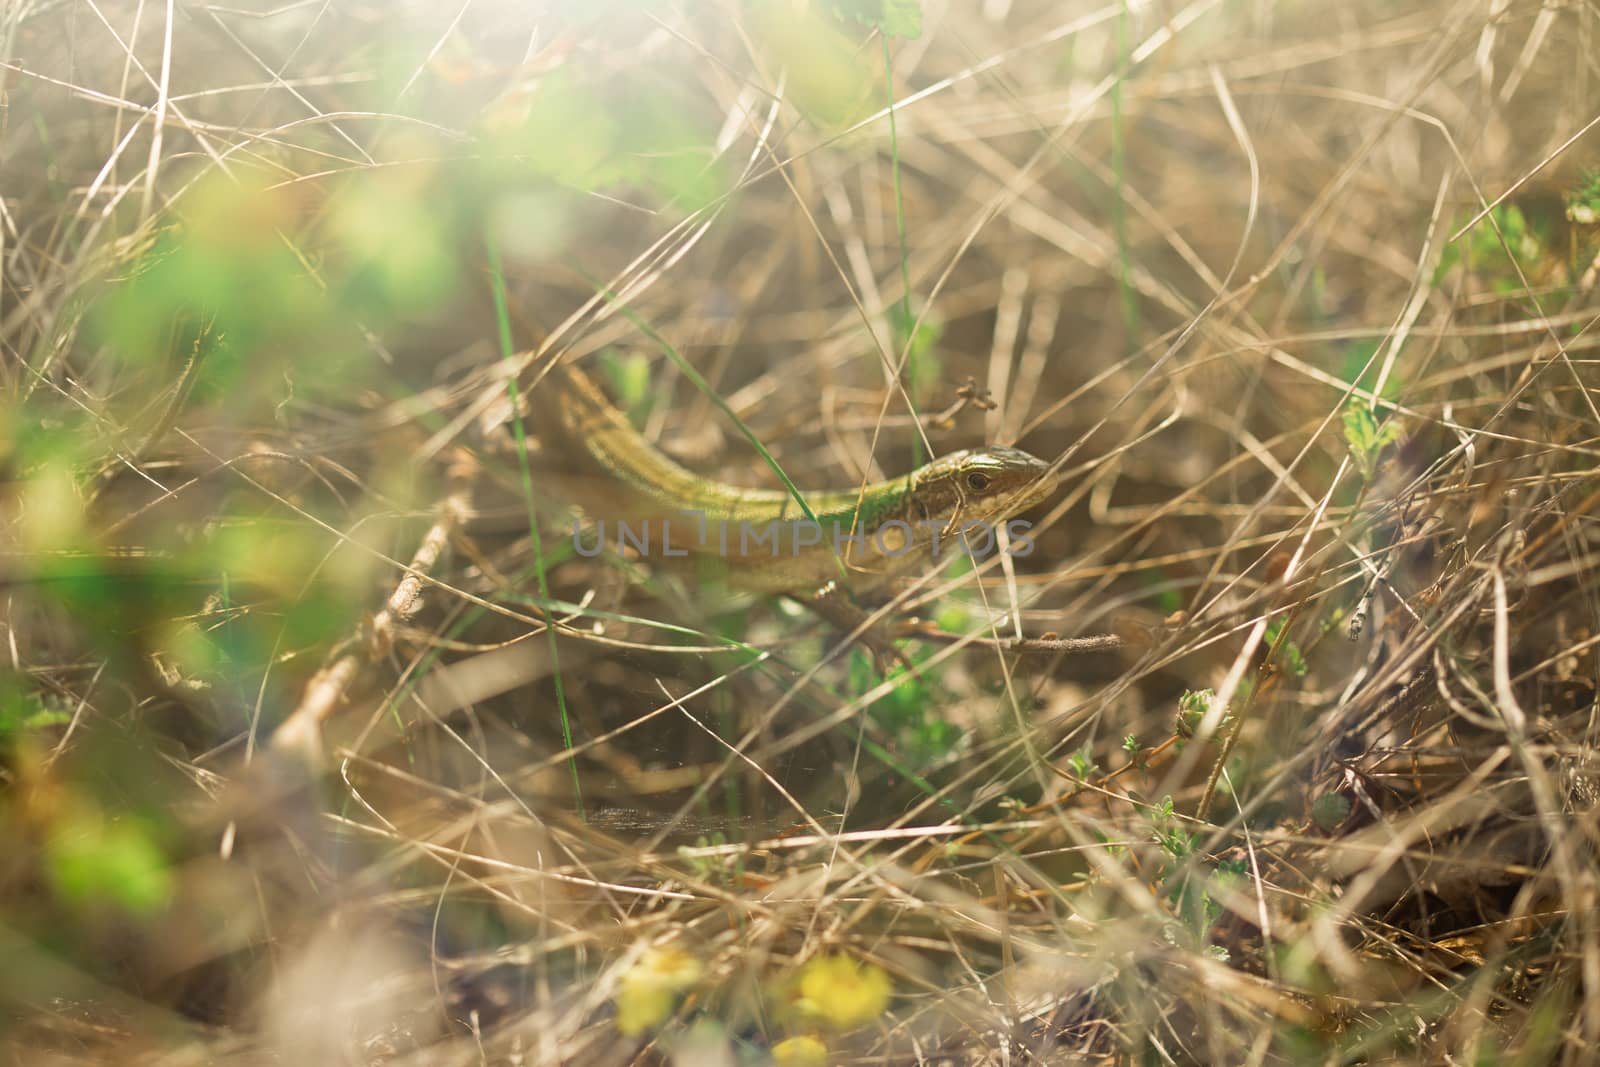 The lizard is hiding in the grass by tadeush89